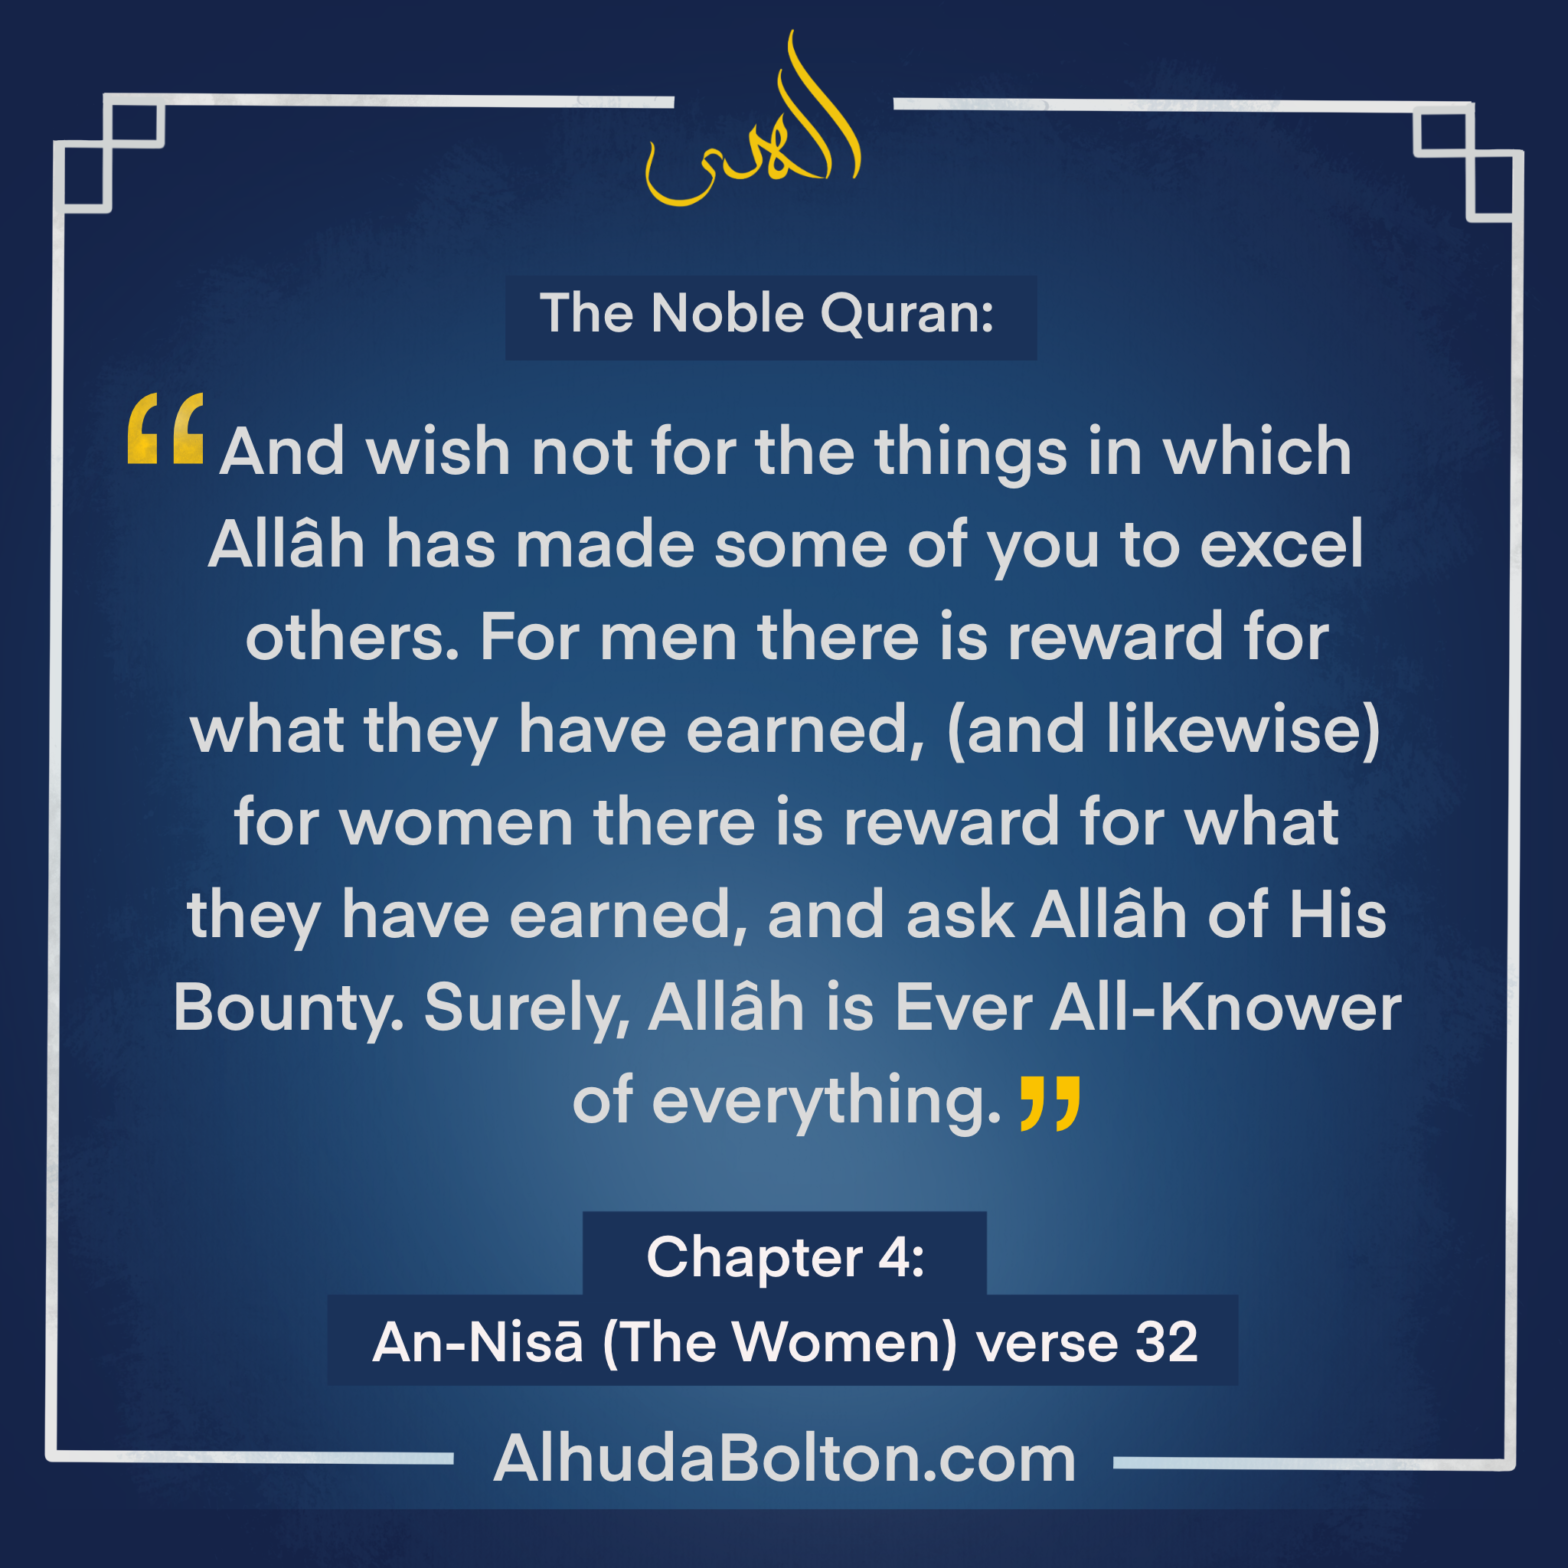 Weekly Quran: “and ask Allah of His Bounty”